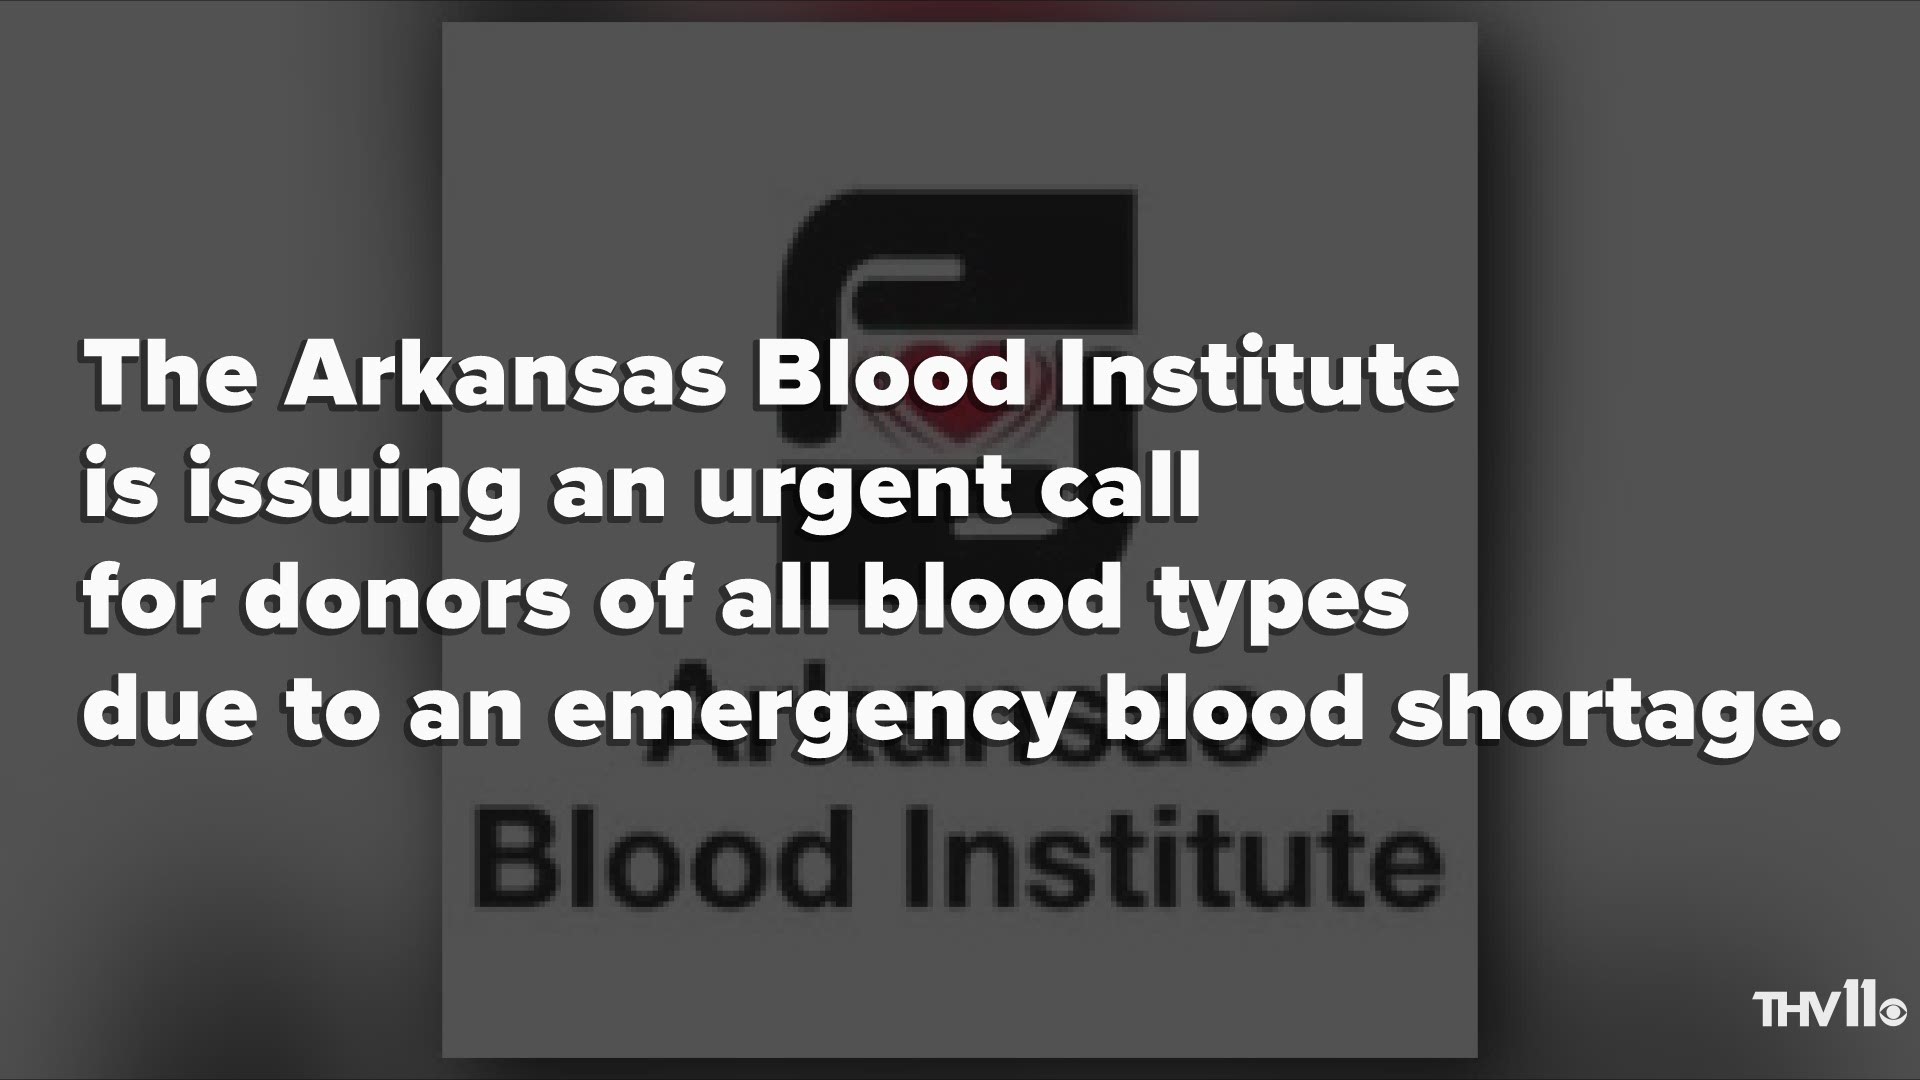 The Arkansas Blood Institute has an urgent need for blood donors.